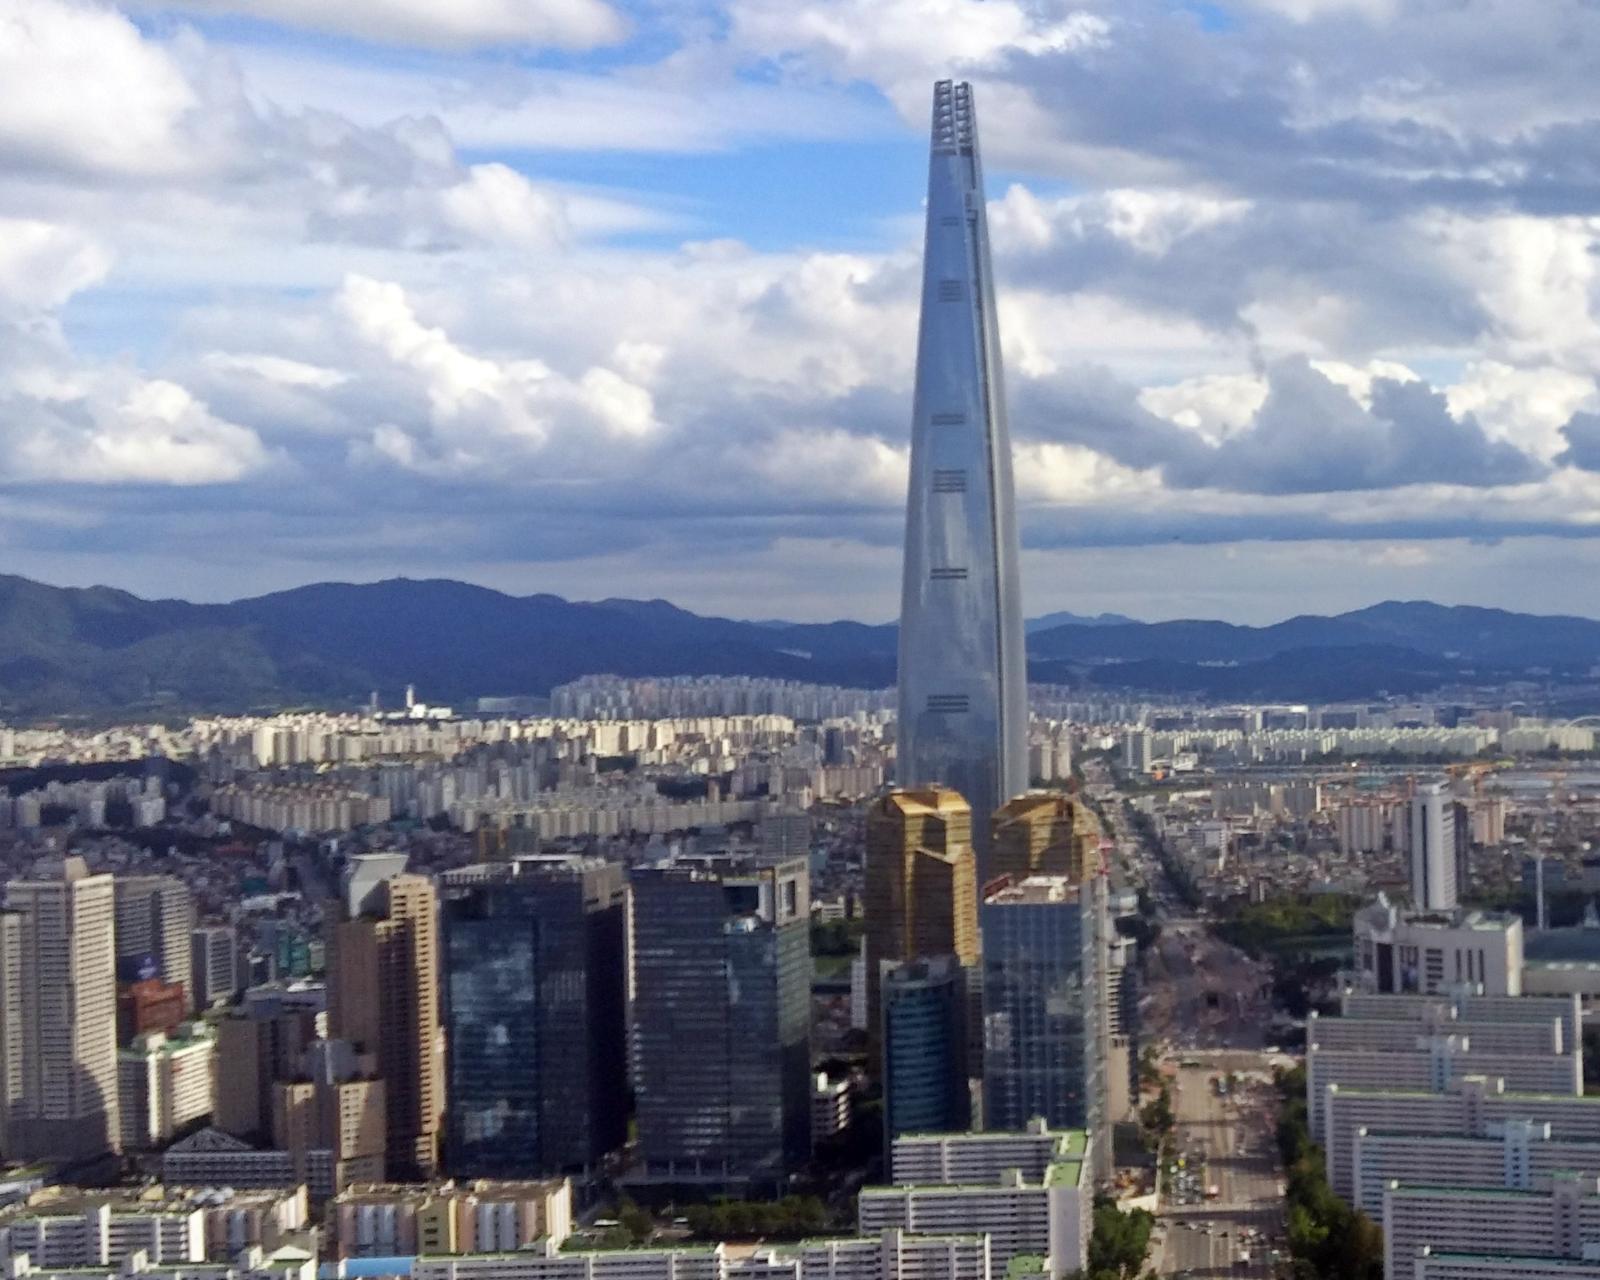 Lotte world tower.